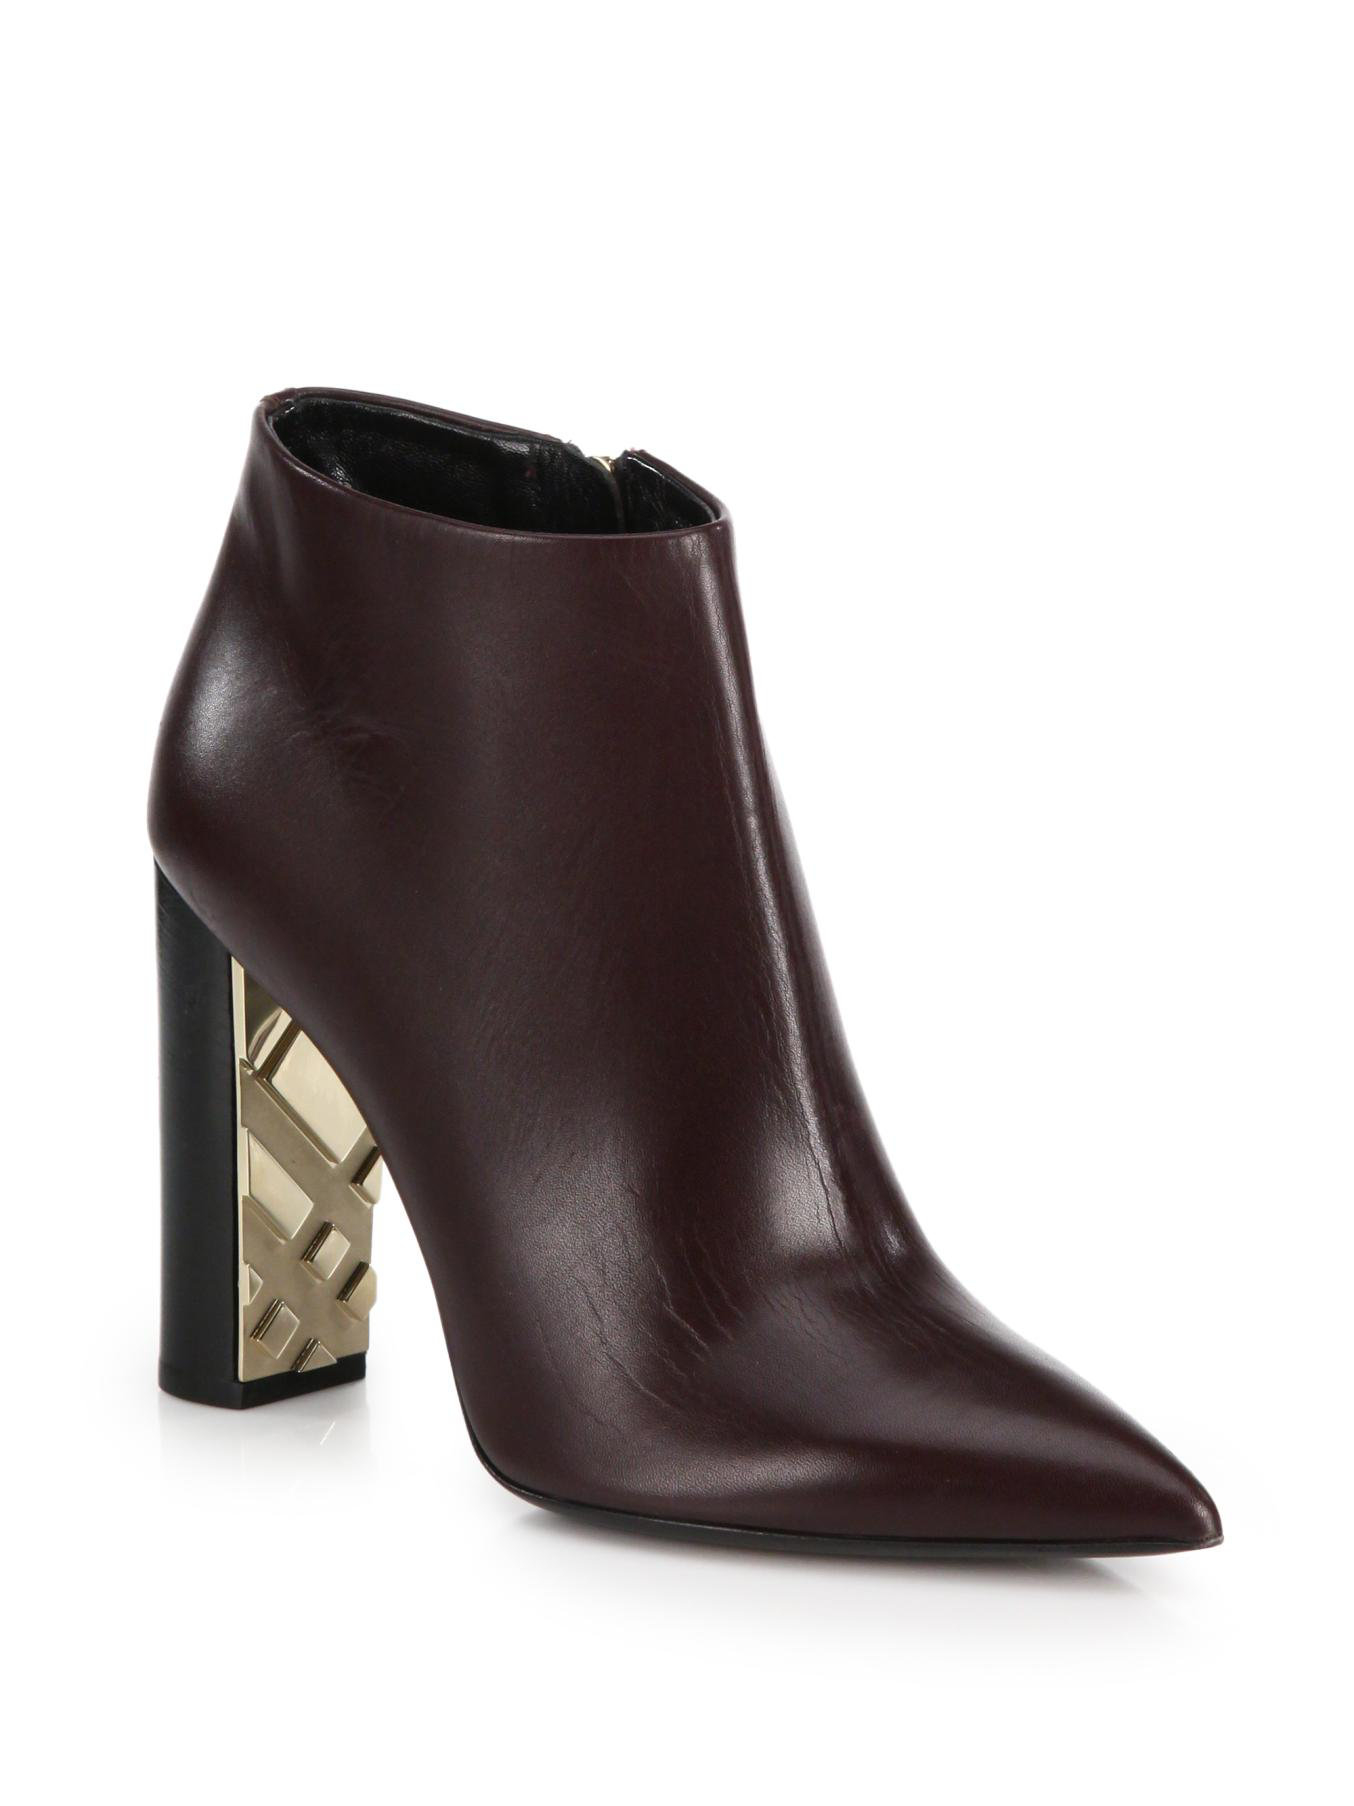 Lyst - Burberry Bamburgh Leather Point-toe Booties in Brown